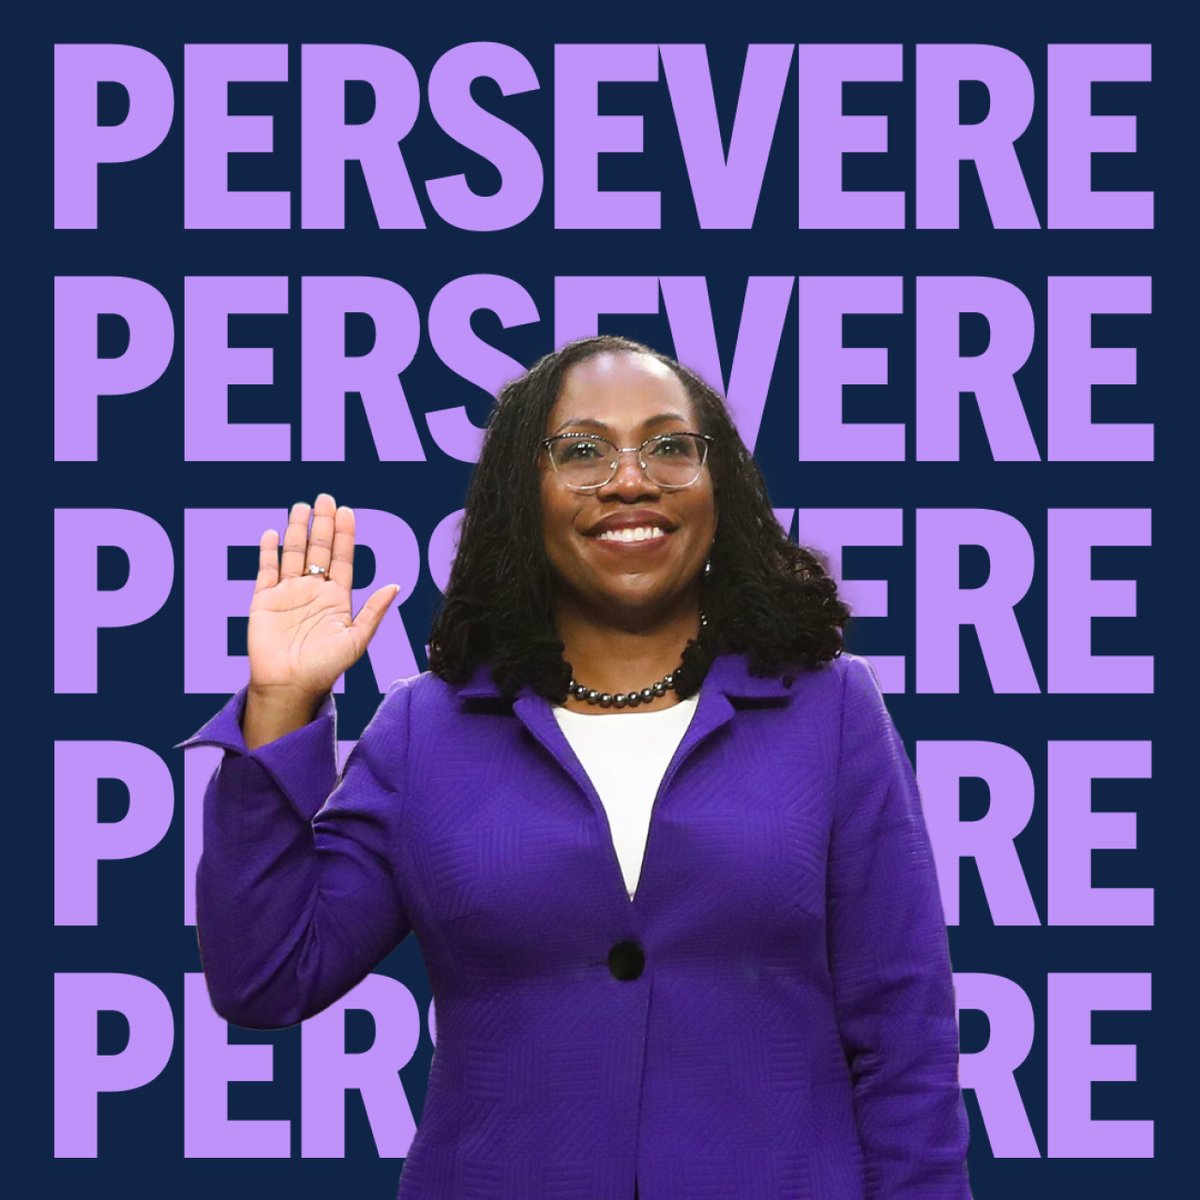 When asked what she would say to the young Americans watching her confirmation hearing, Judge Ketanji Brown Jackson said: 

'I would tell them to persevere.'

#SCOTUS #ConfirmKBJ